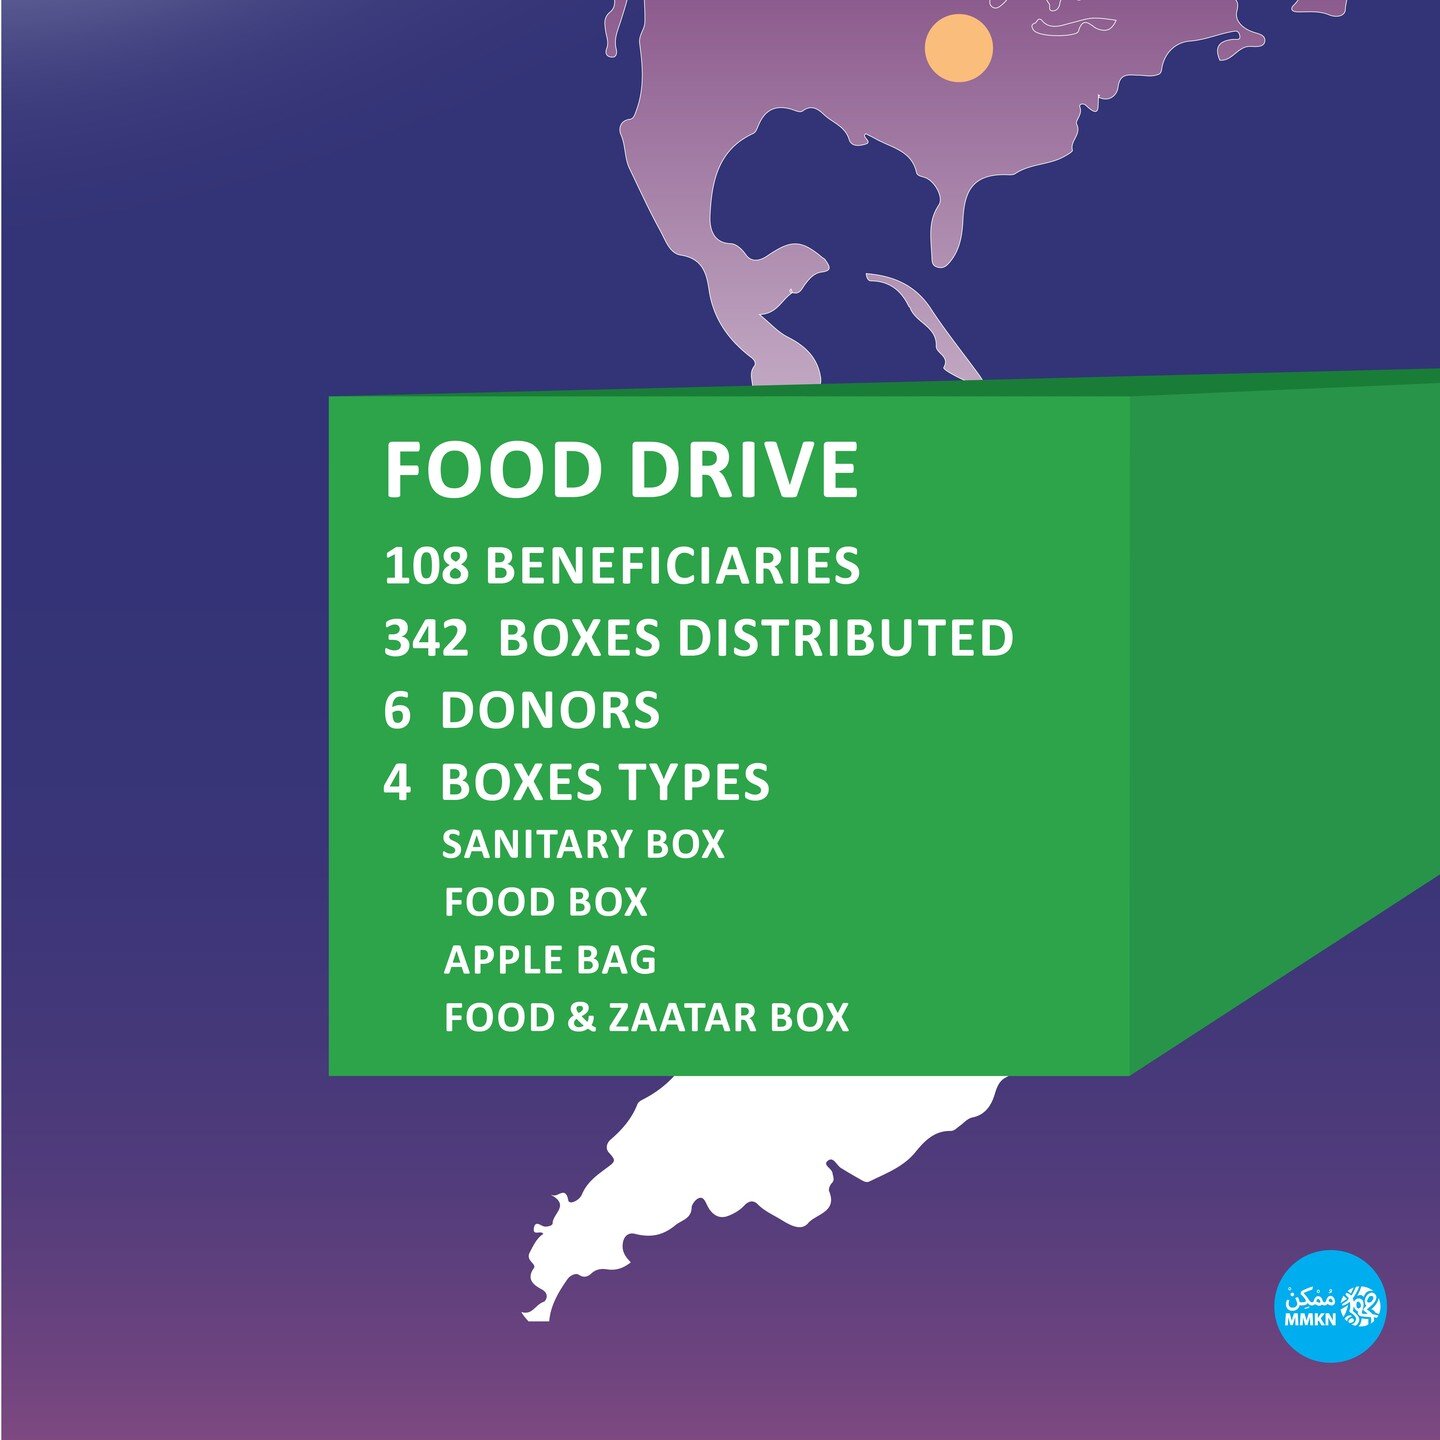 In our third year, the MMKN Food Drive has sustained its aid to the most vulnerable families, despite a deteriorating financial and humanitarian landscape in Lebanon.

With your support, the MMKN Food Drive was able to tap into local partners to deli